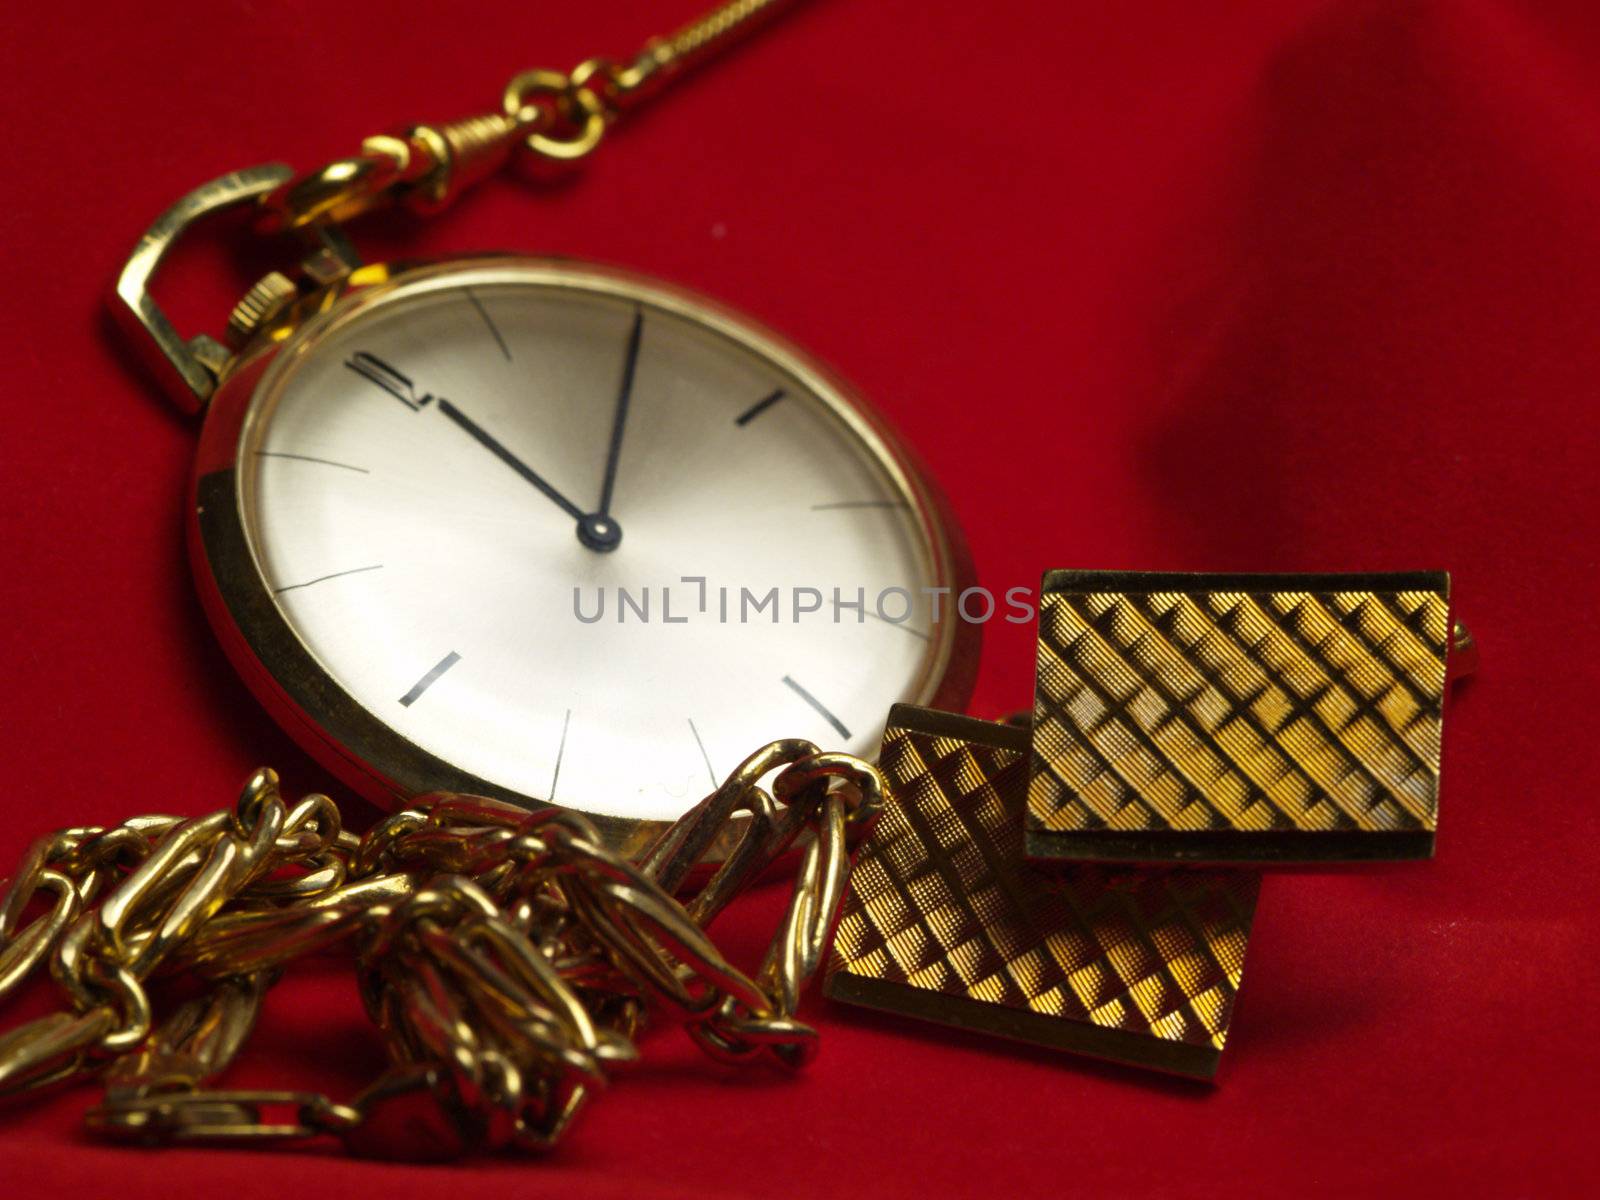 gold pocket watch, necklace and cuff links on red velvet